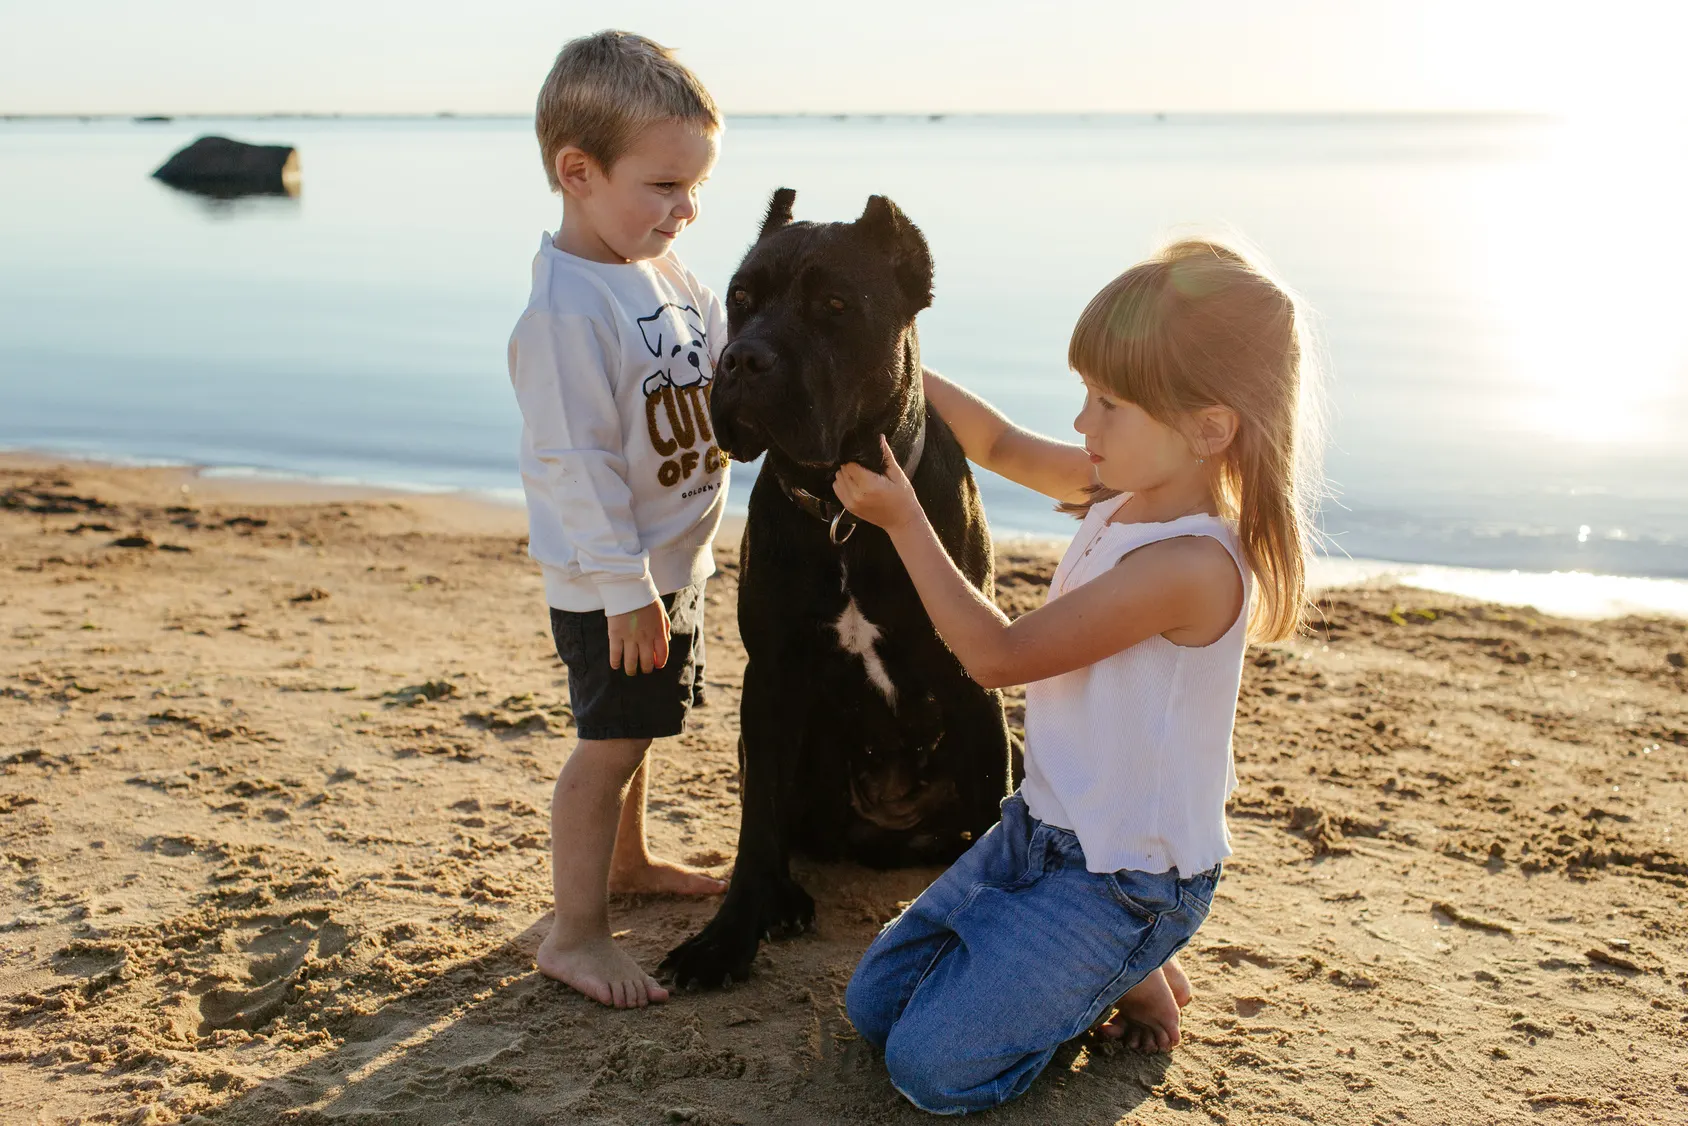 Two kids petting Cane Corso dog on the beach